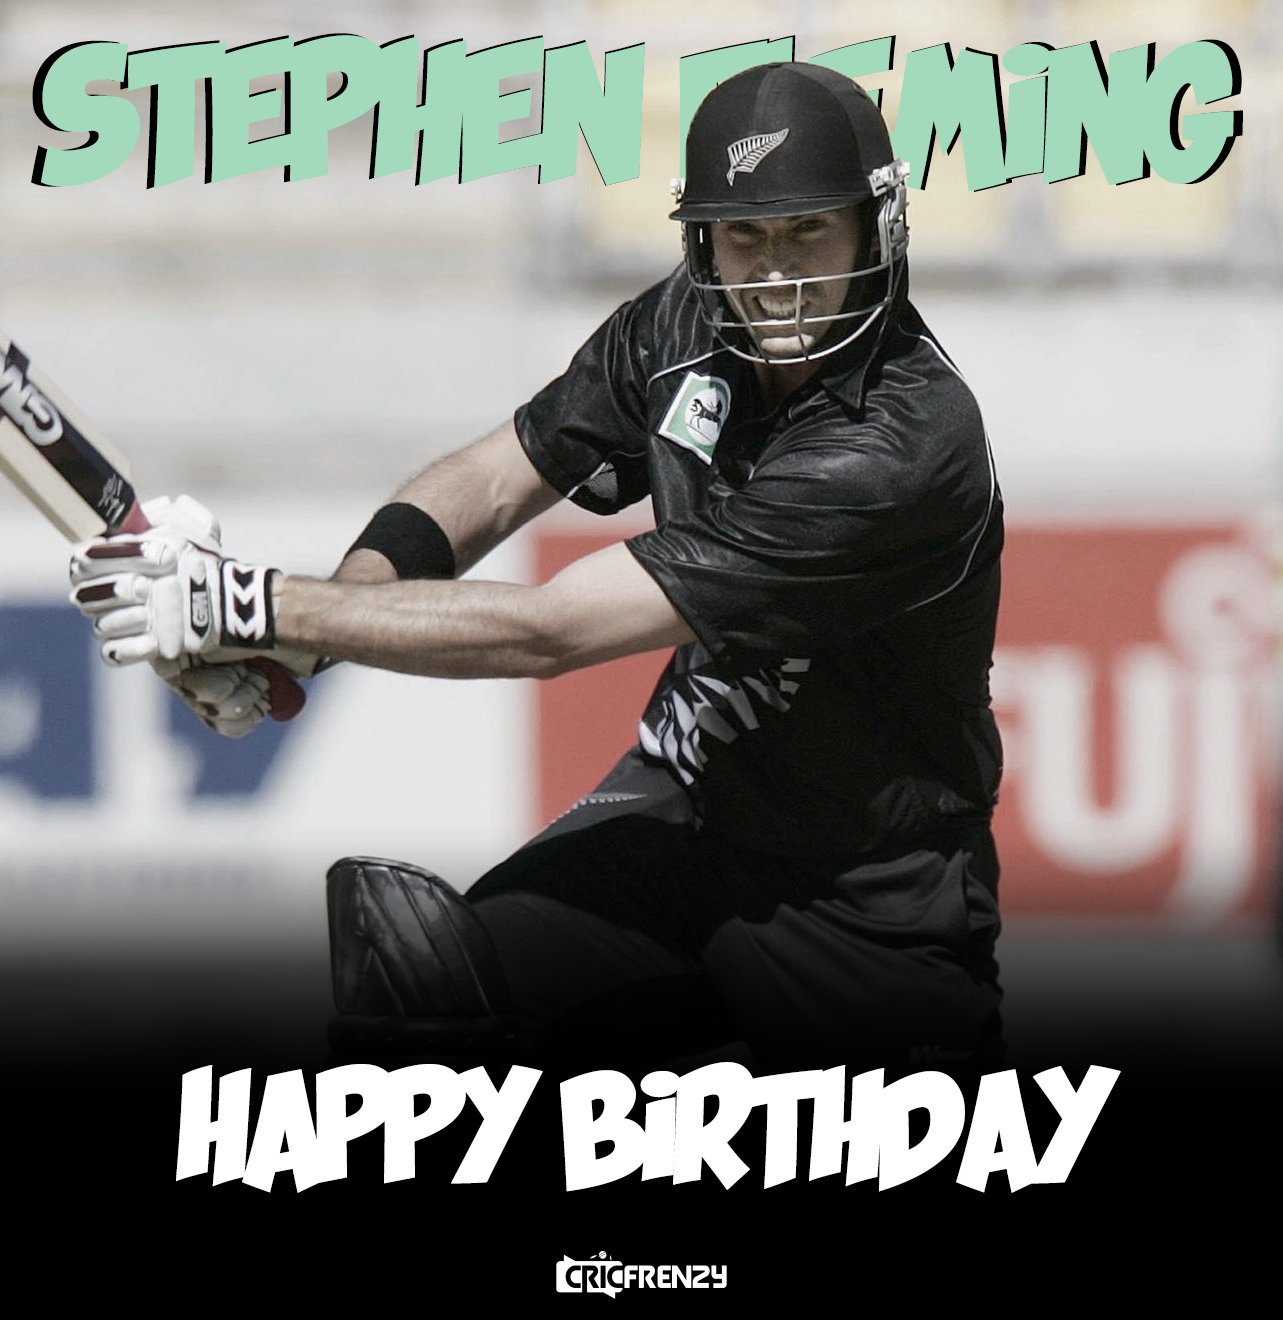 Second most capped ODI Captain (behind Ricky Ponting)
Happy birthday Stephen Fleming    